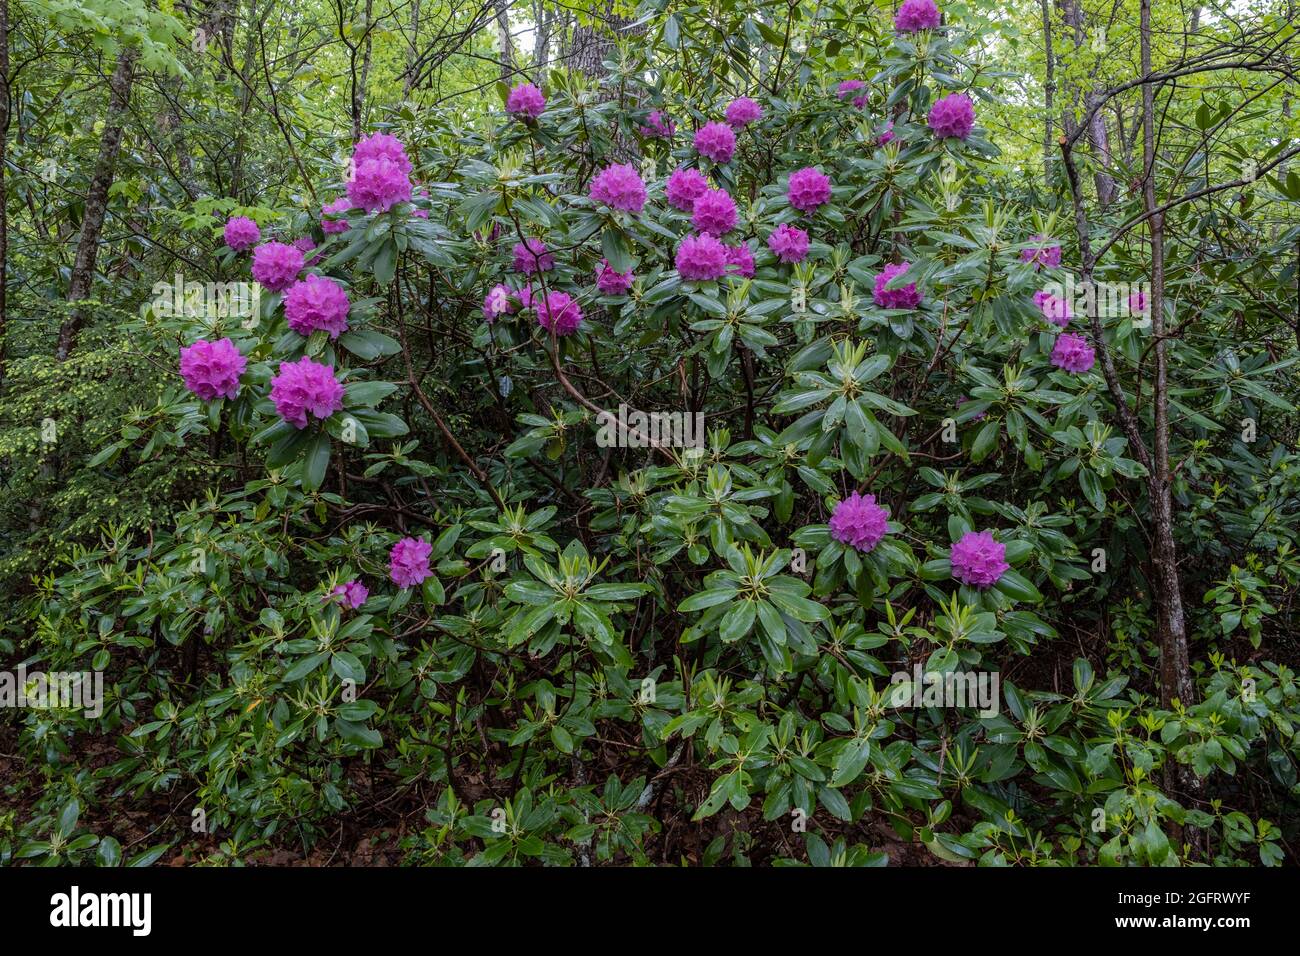 New River Gorge National Park, West Virginia. Rhododendron entlang des Endless Wall Trail. Stockfoto